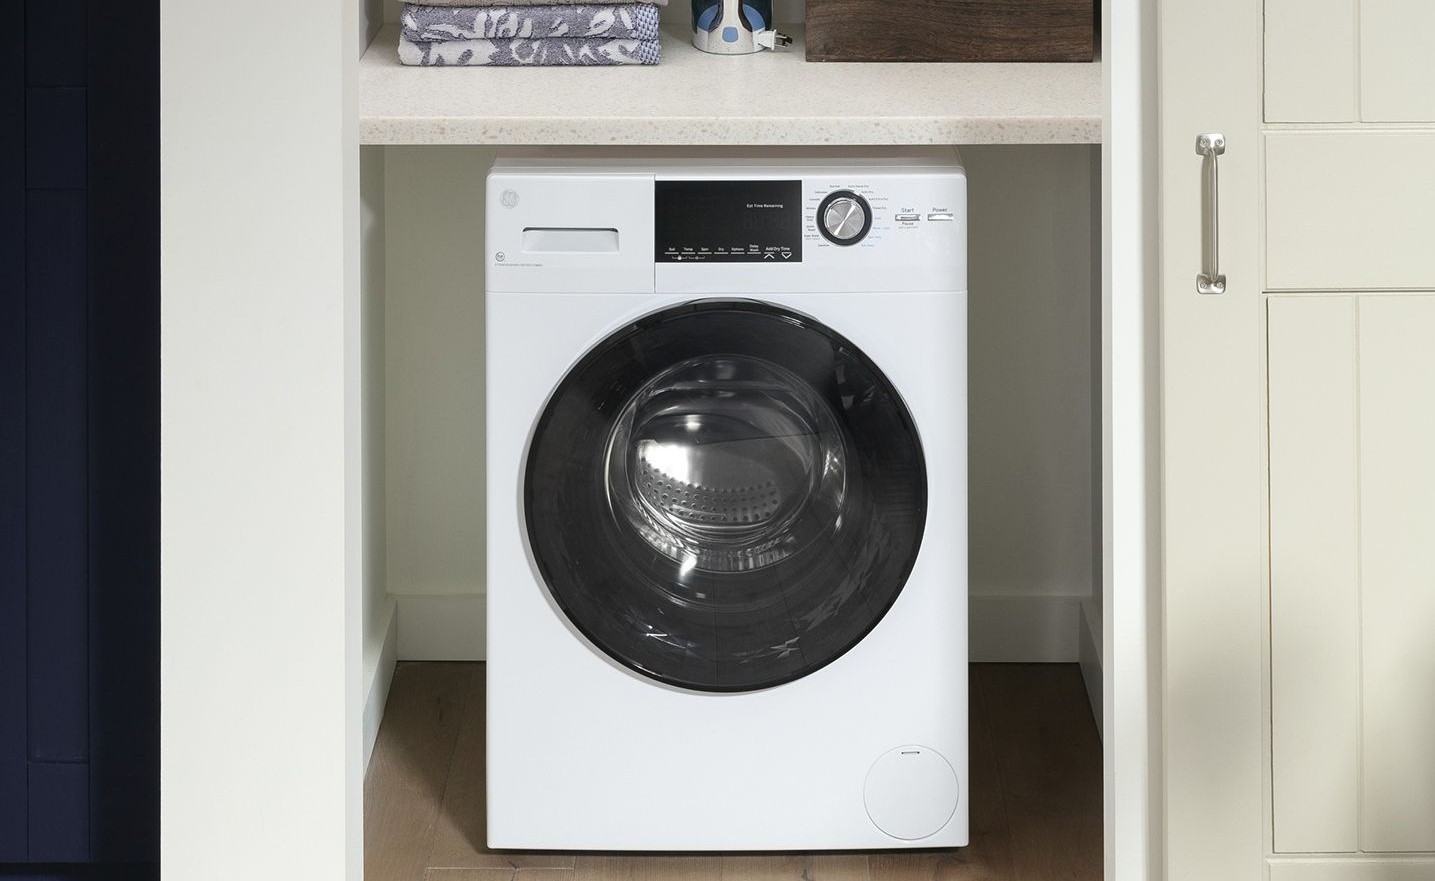 Splendide Stackable Washer/Dryer - Best Silent and Eco-Friendly Washing and  Drying Combo